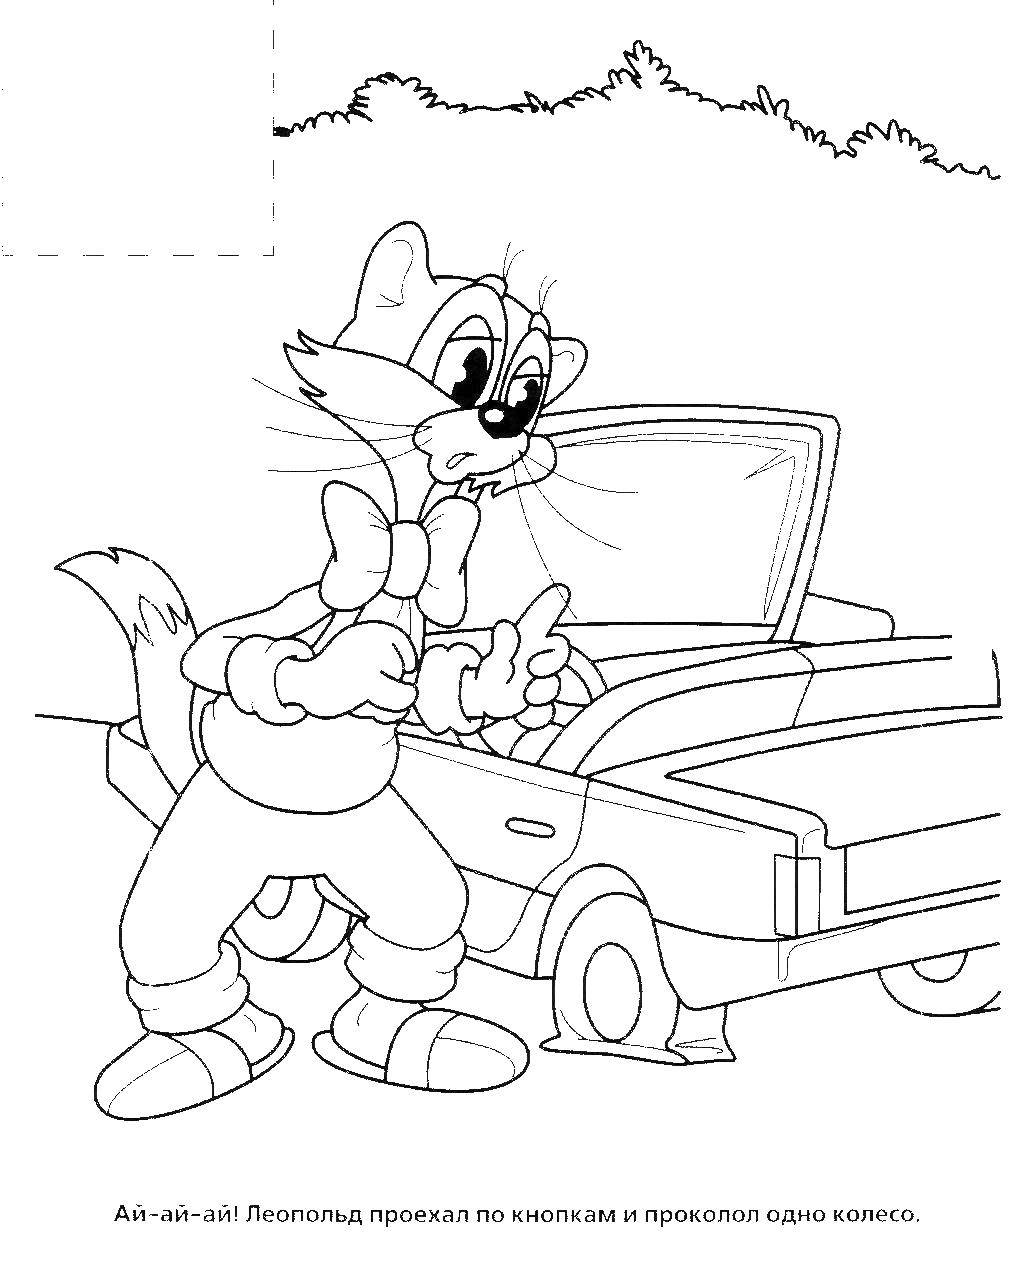 Coloring Leopold the cat and run-flat tire. Category coloring cat Leopold. Tags:  The cat, Leopold.